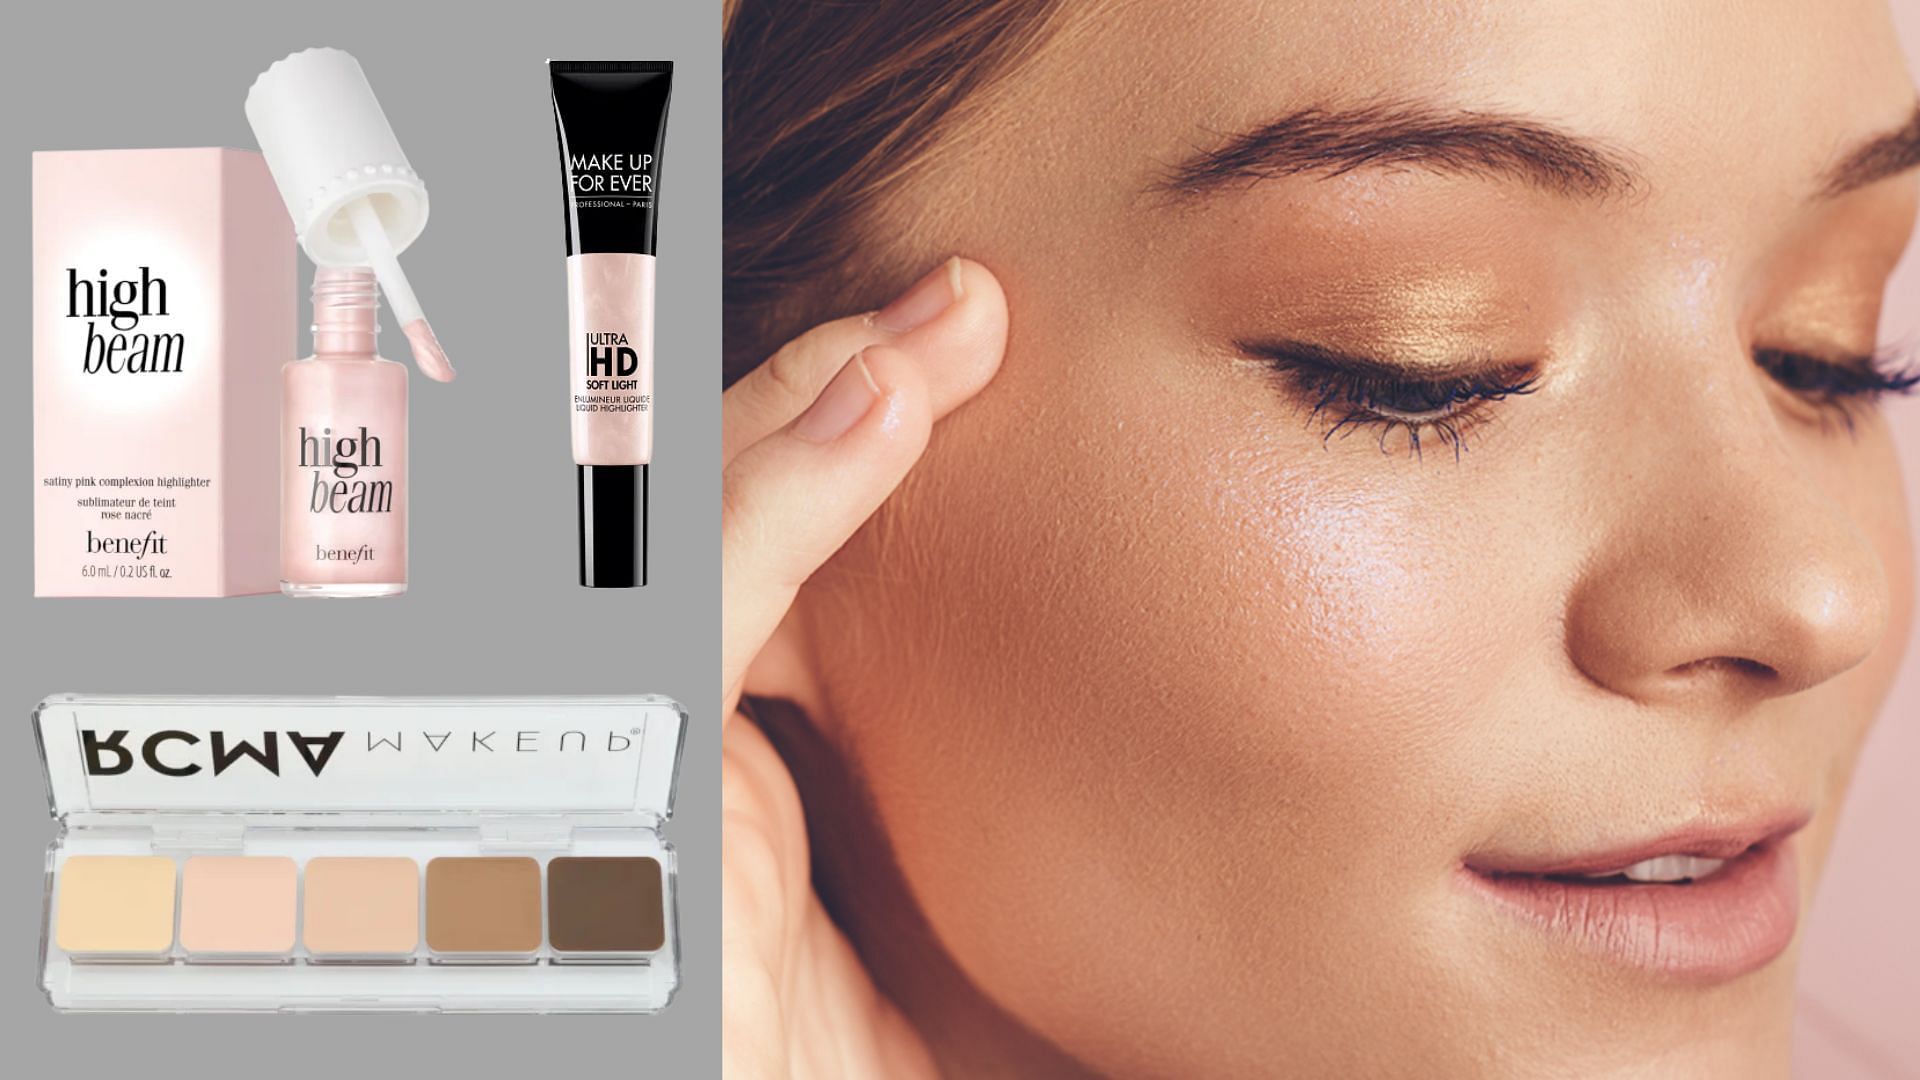 Accentuate the facial contours with the 5 best highlighters of 2023. (Image via Sportskeeda)